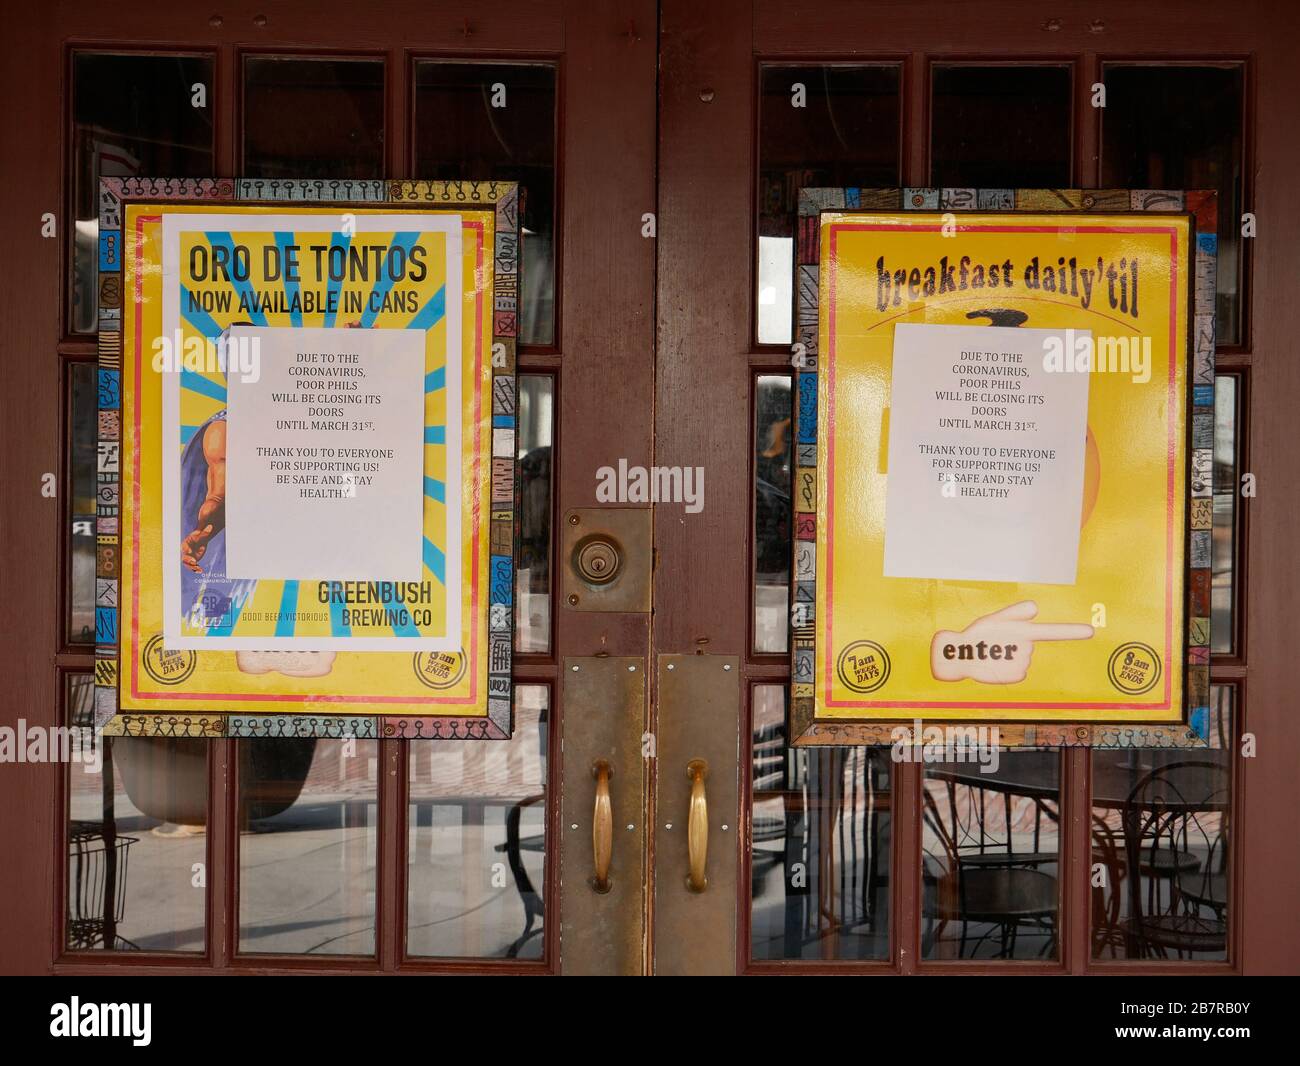 Oak Park, Illinois, USA,. 17th March 2020. Signs on the door of a pub in this western suburb of Chicago state the bar is closed until 31 March due to  the Coronavirus/COVID-19 pandemic. Governor Pritzker has ordered all bars and pubs to close in response to the crisis. Stock Photo